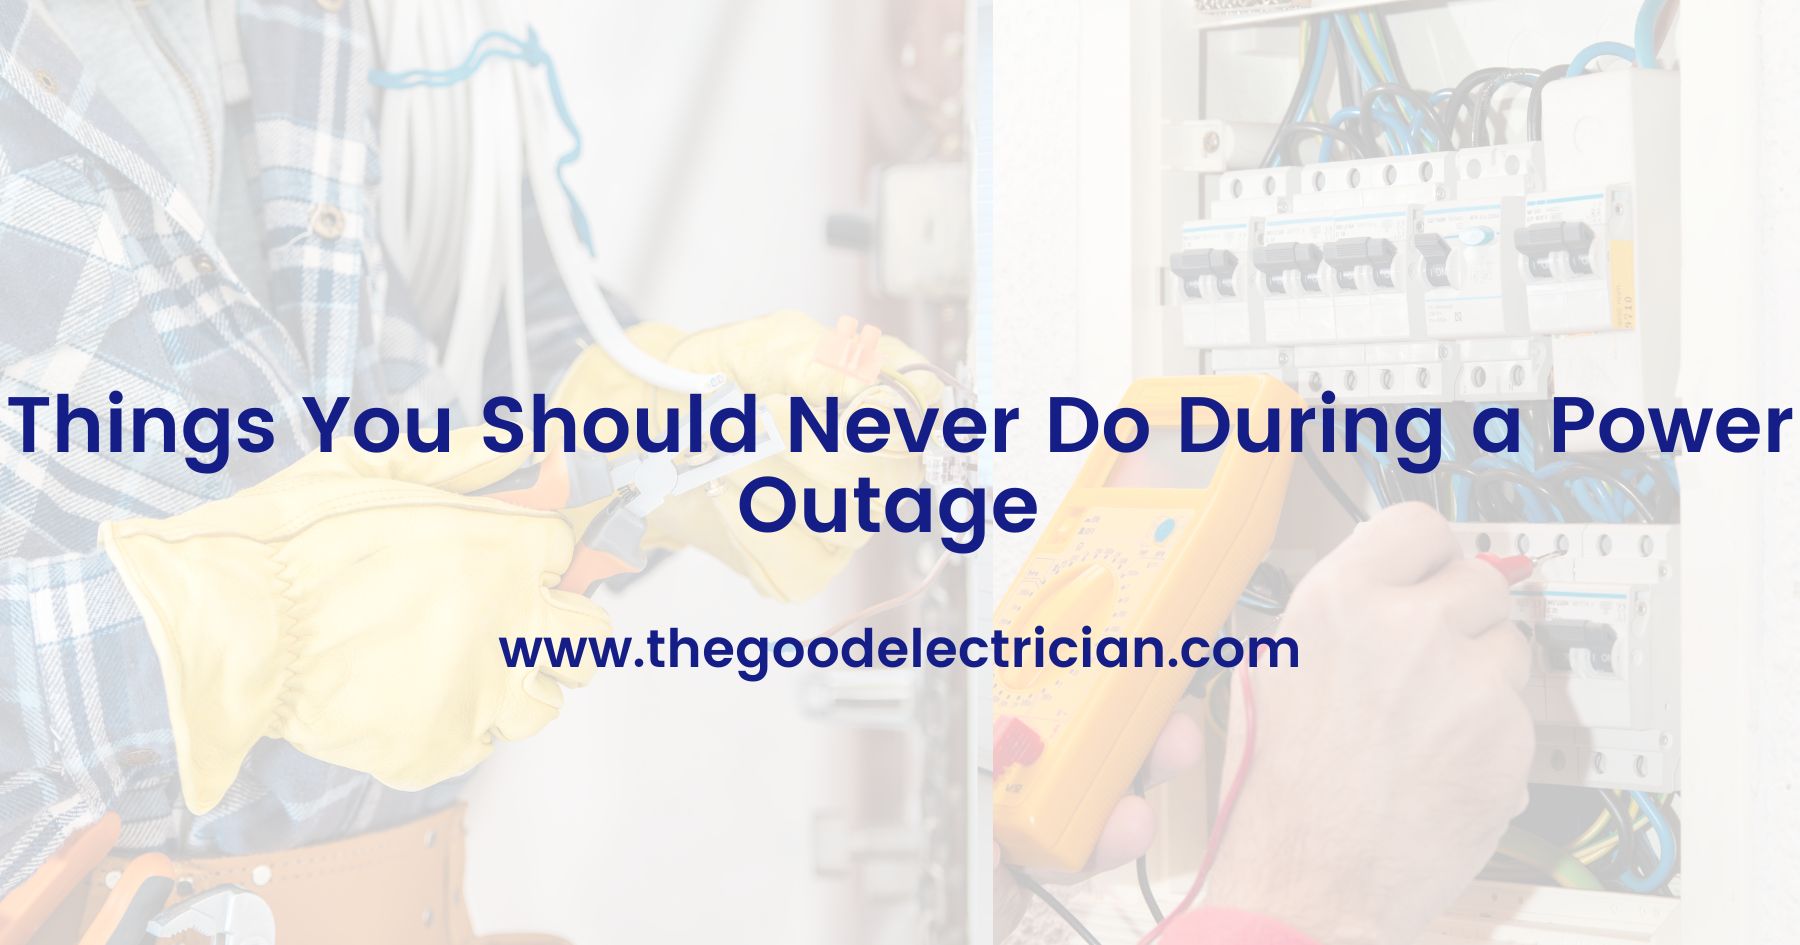 Things You Should Never Do During a Power Outage